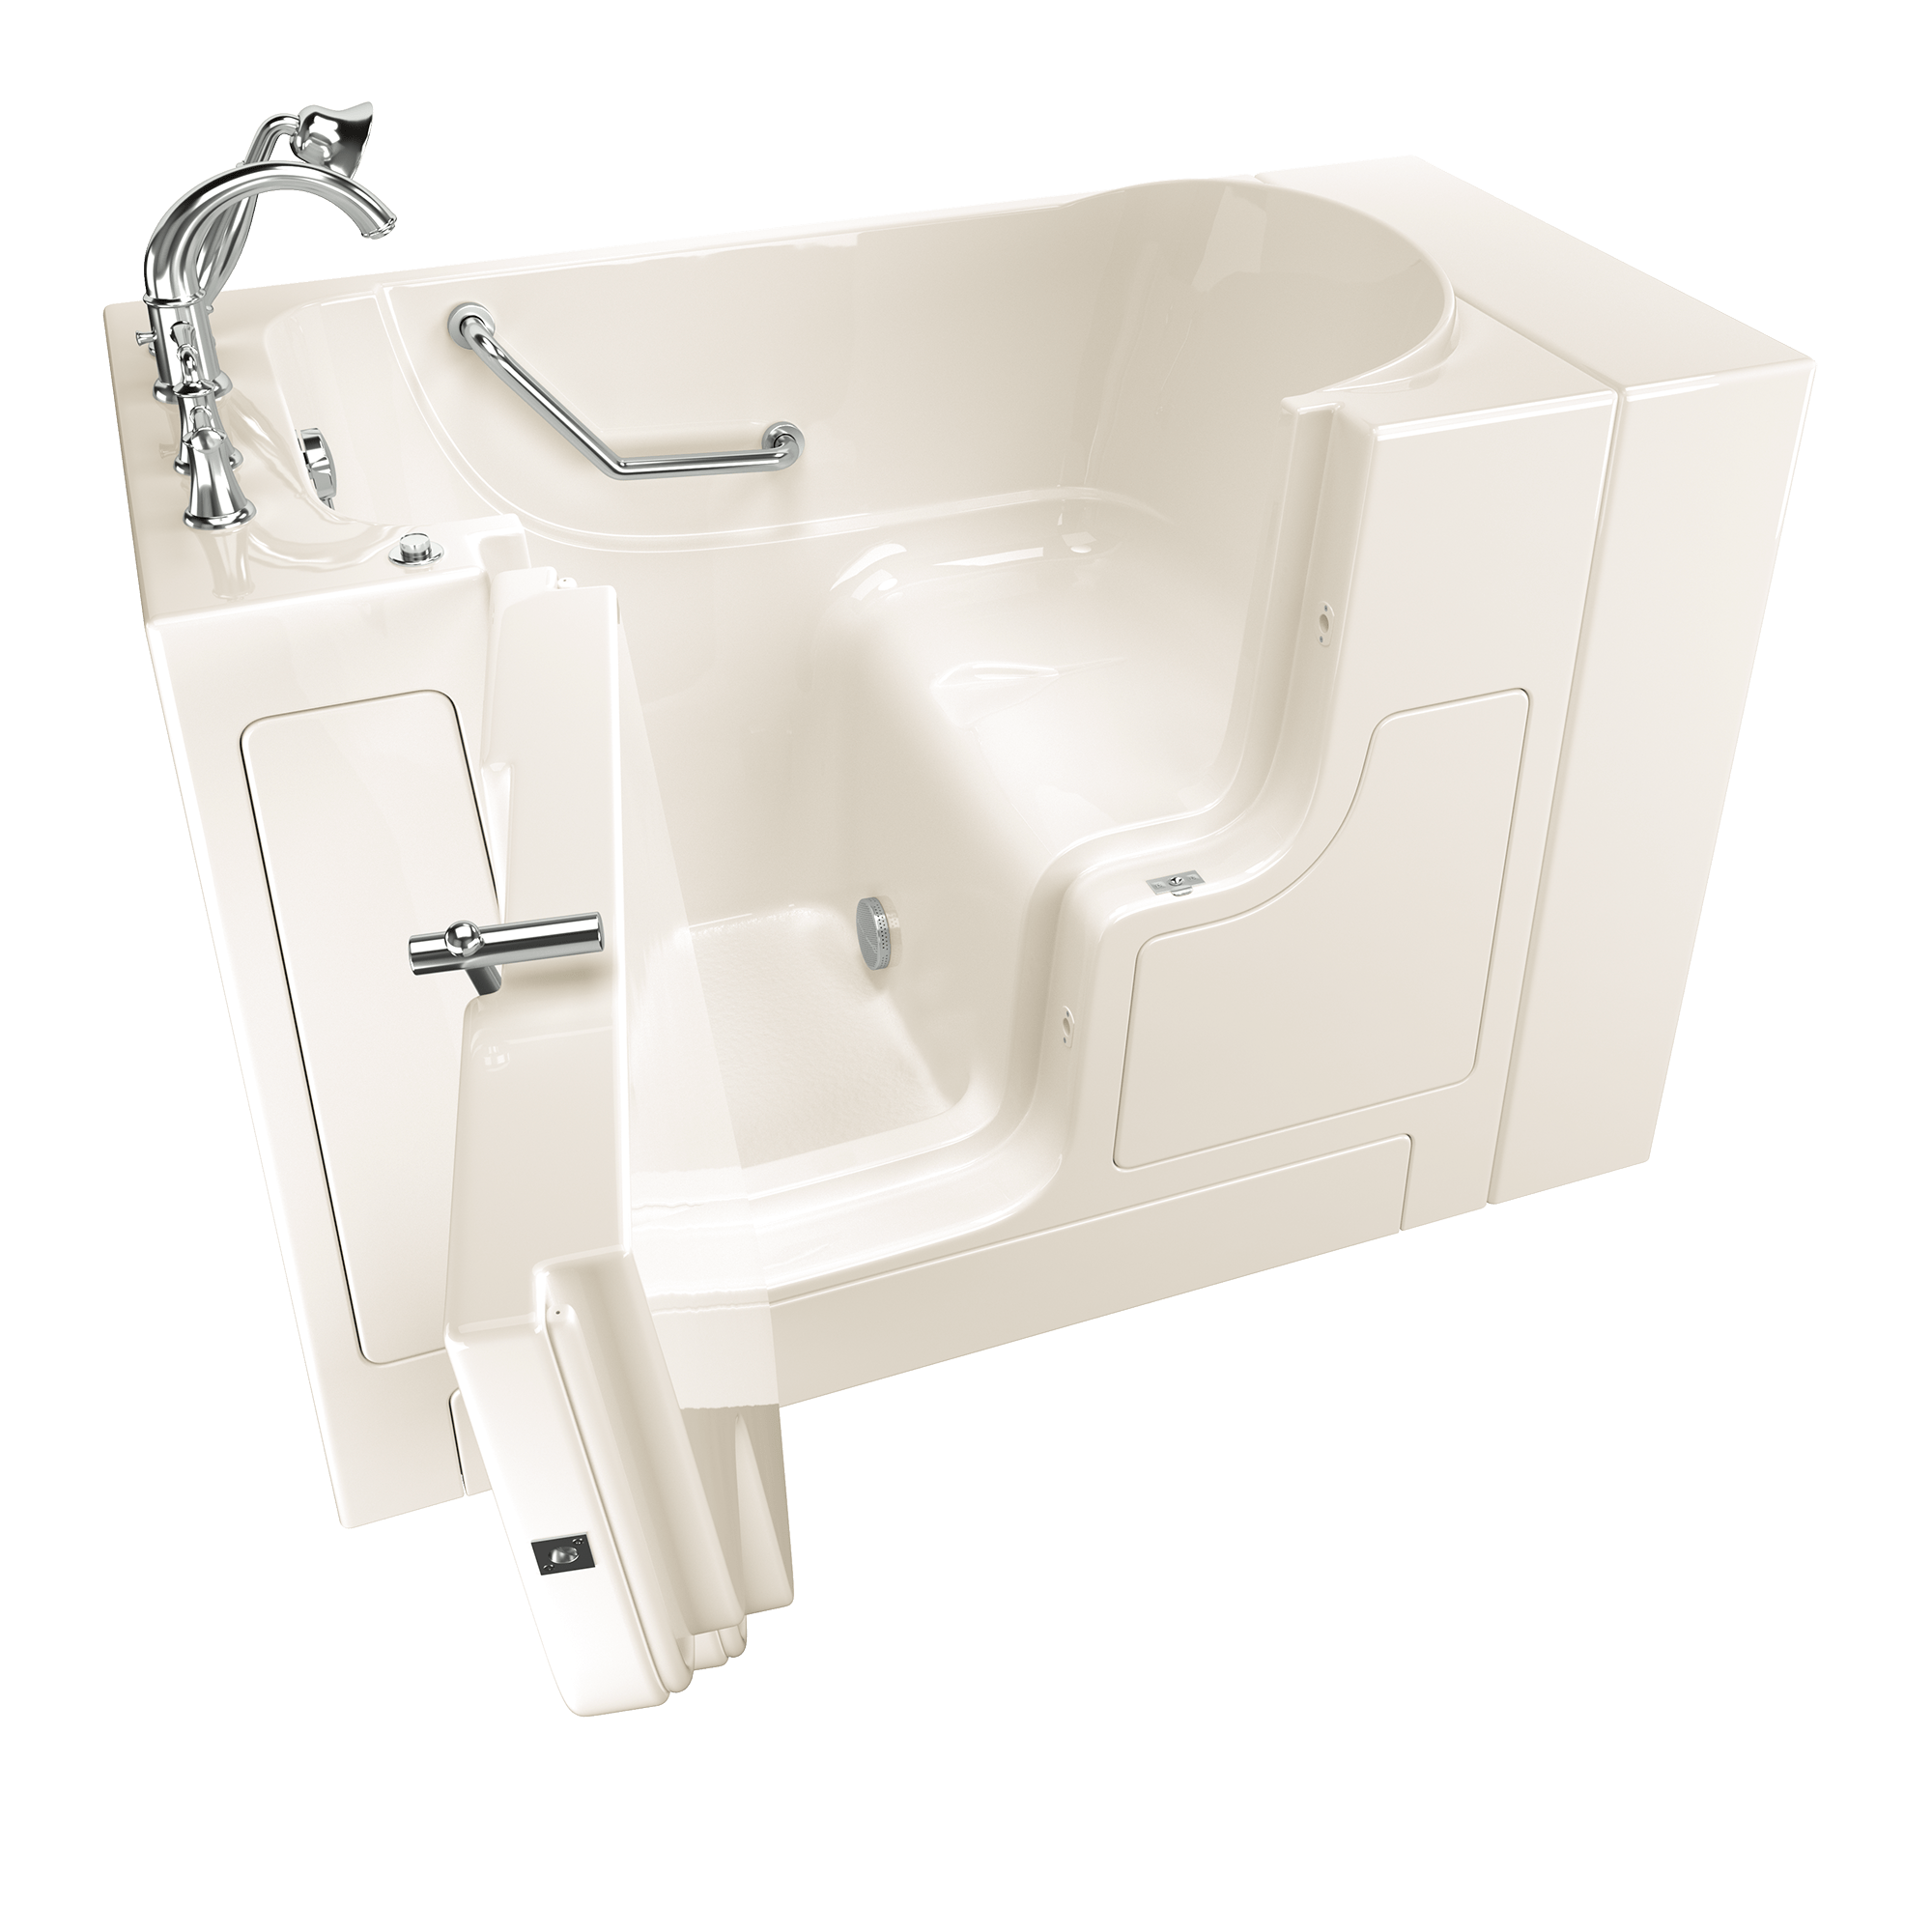 Gelcoat Value Series 30 x 52 -Inch Walk-in Tub With Soaker System - Left-Hand Drain With Faucet